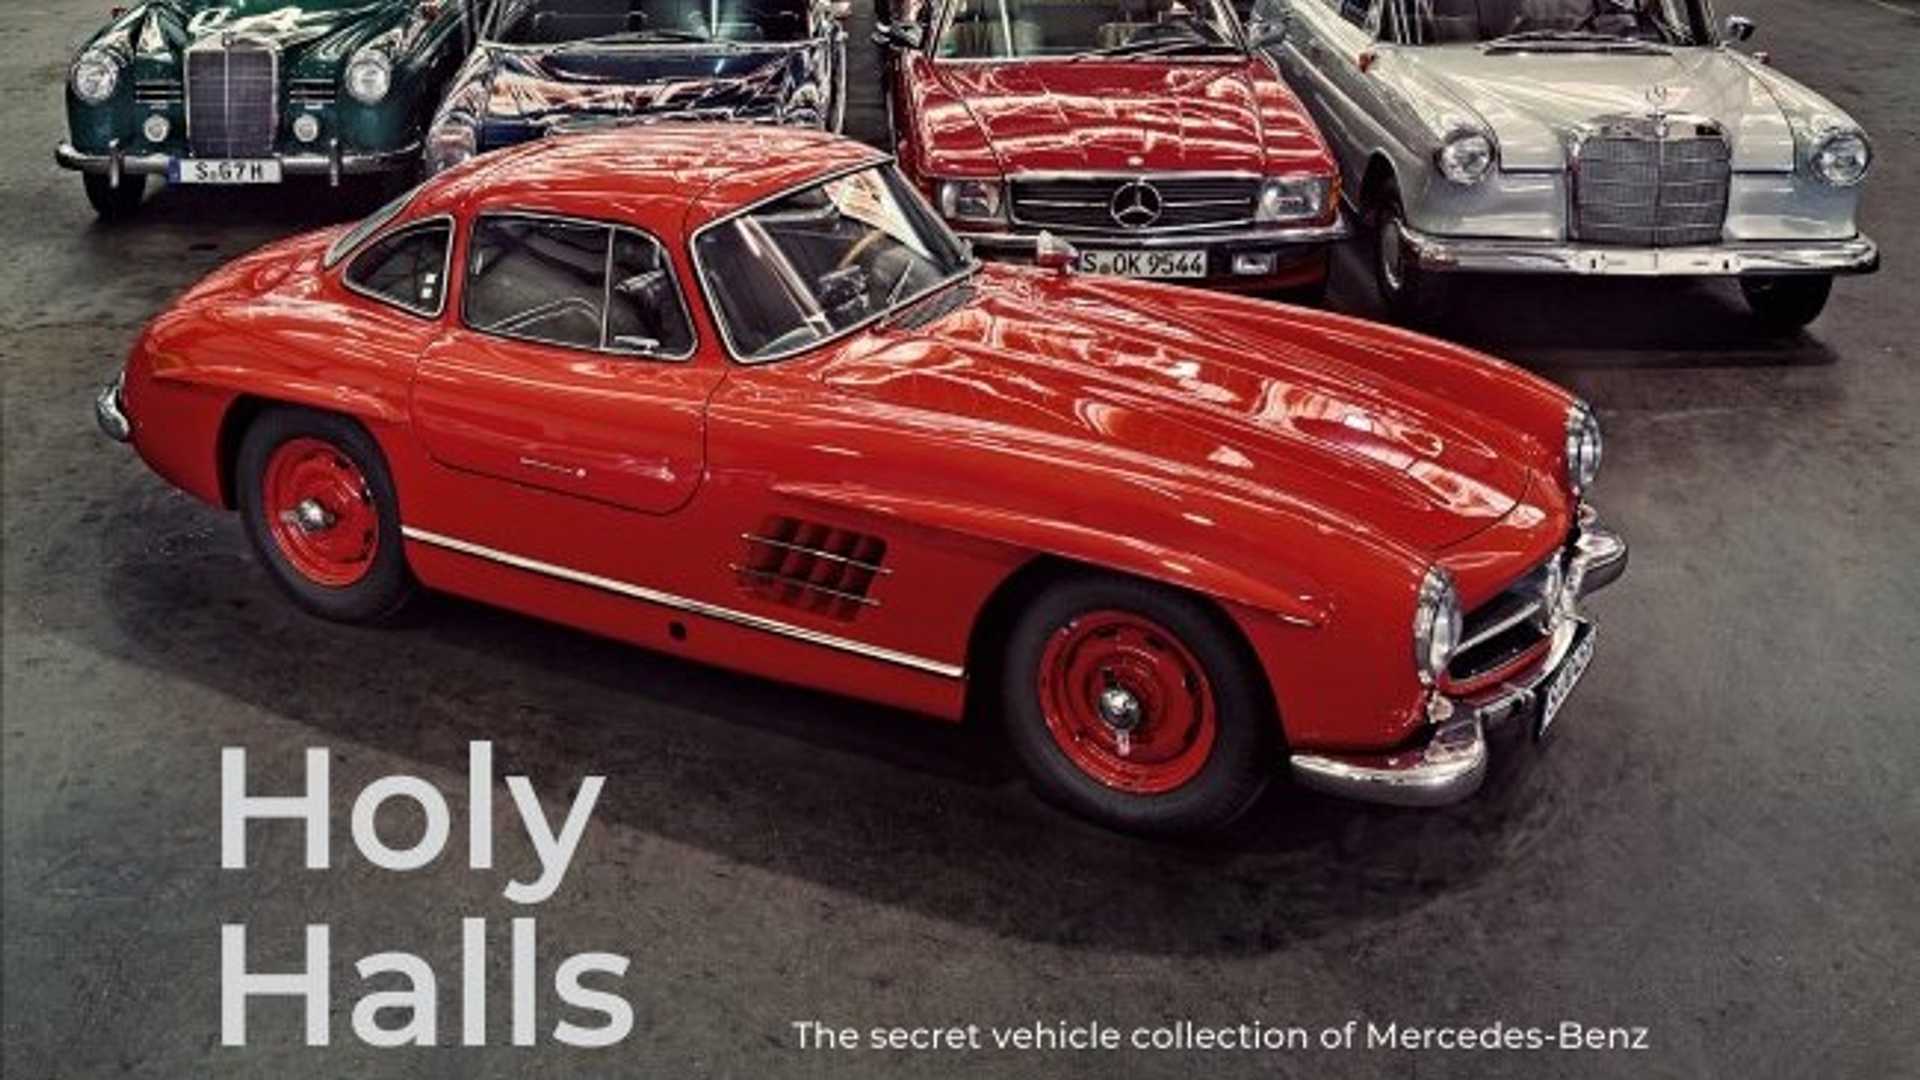 The secrets of the Mercedes-Benz Holy Halls